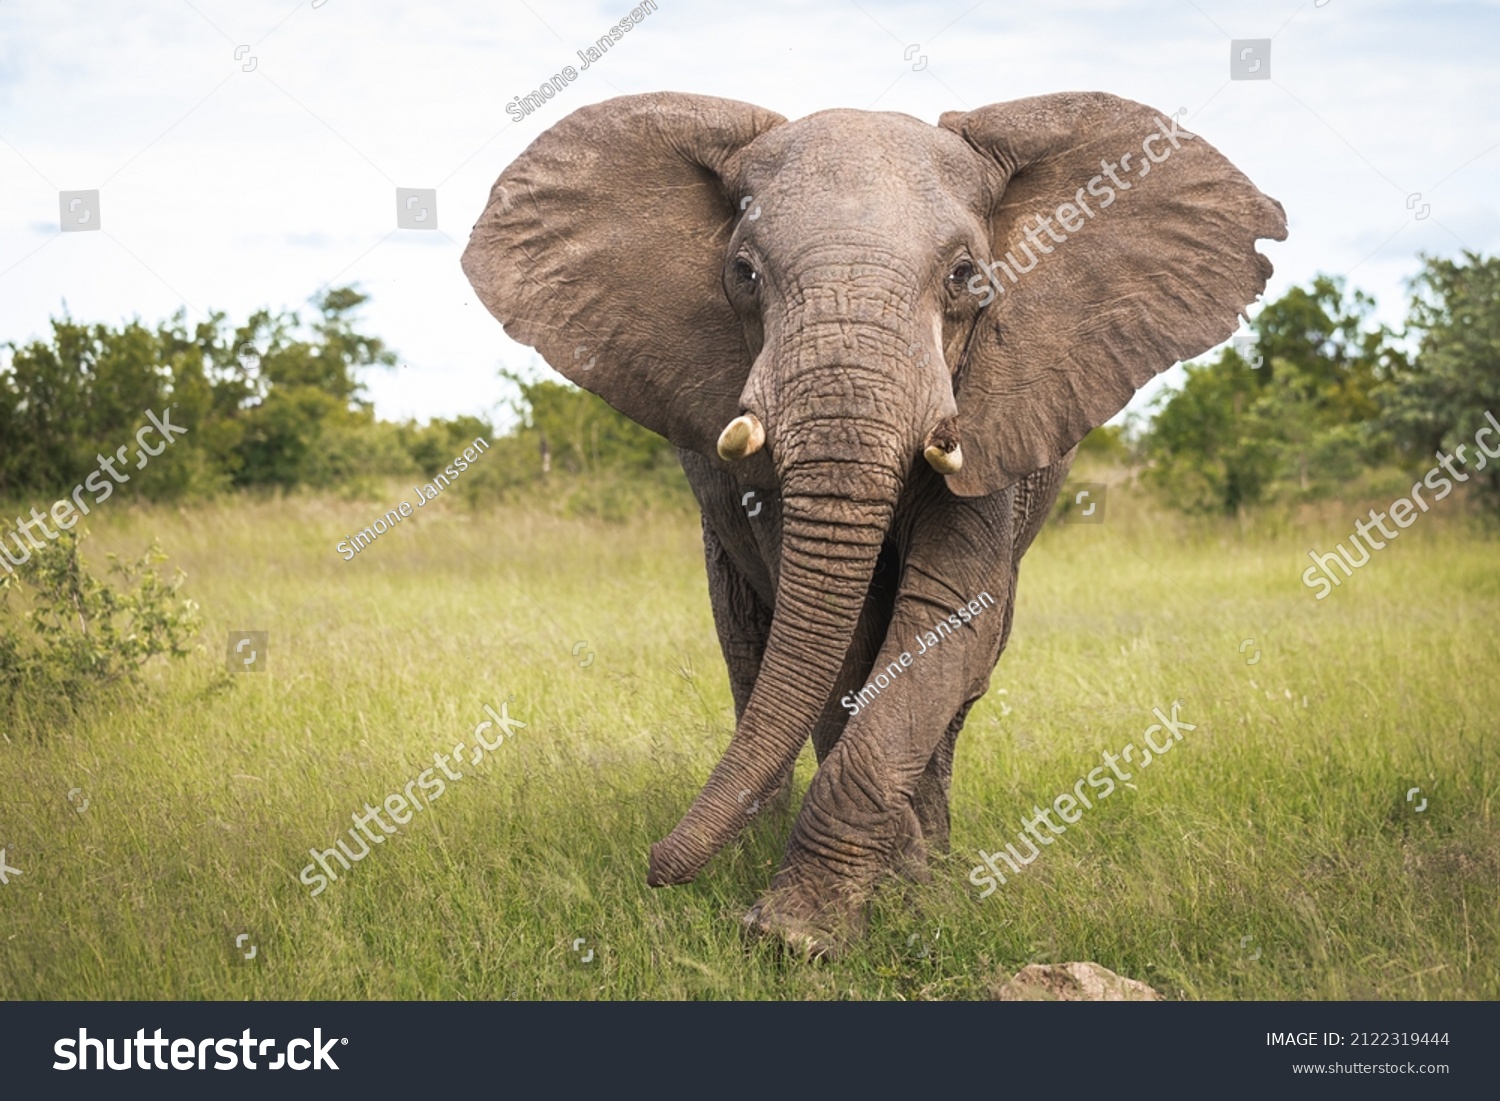 Bull elephant facing the camera, in beautiful pose in tall grass #2122319444